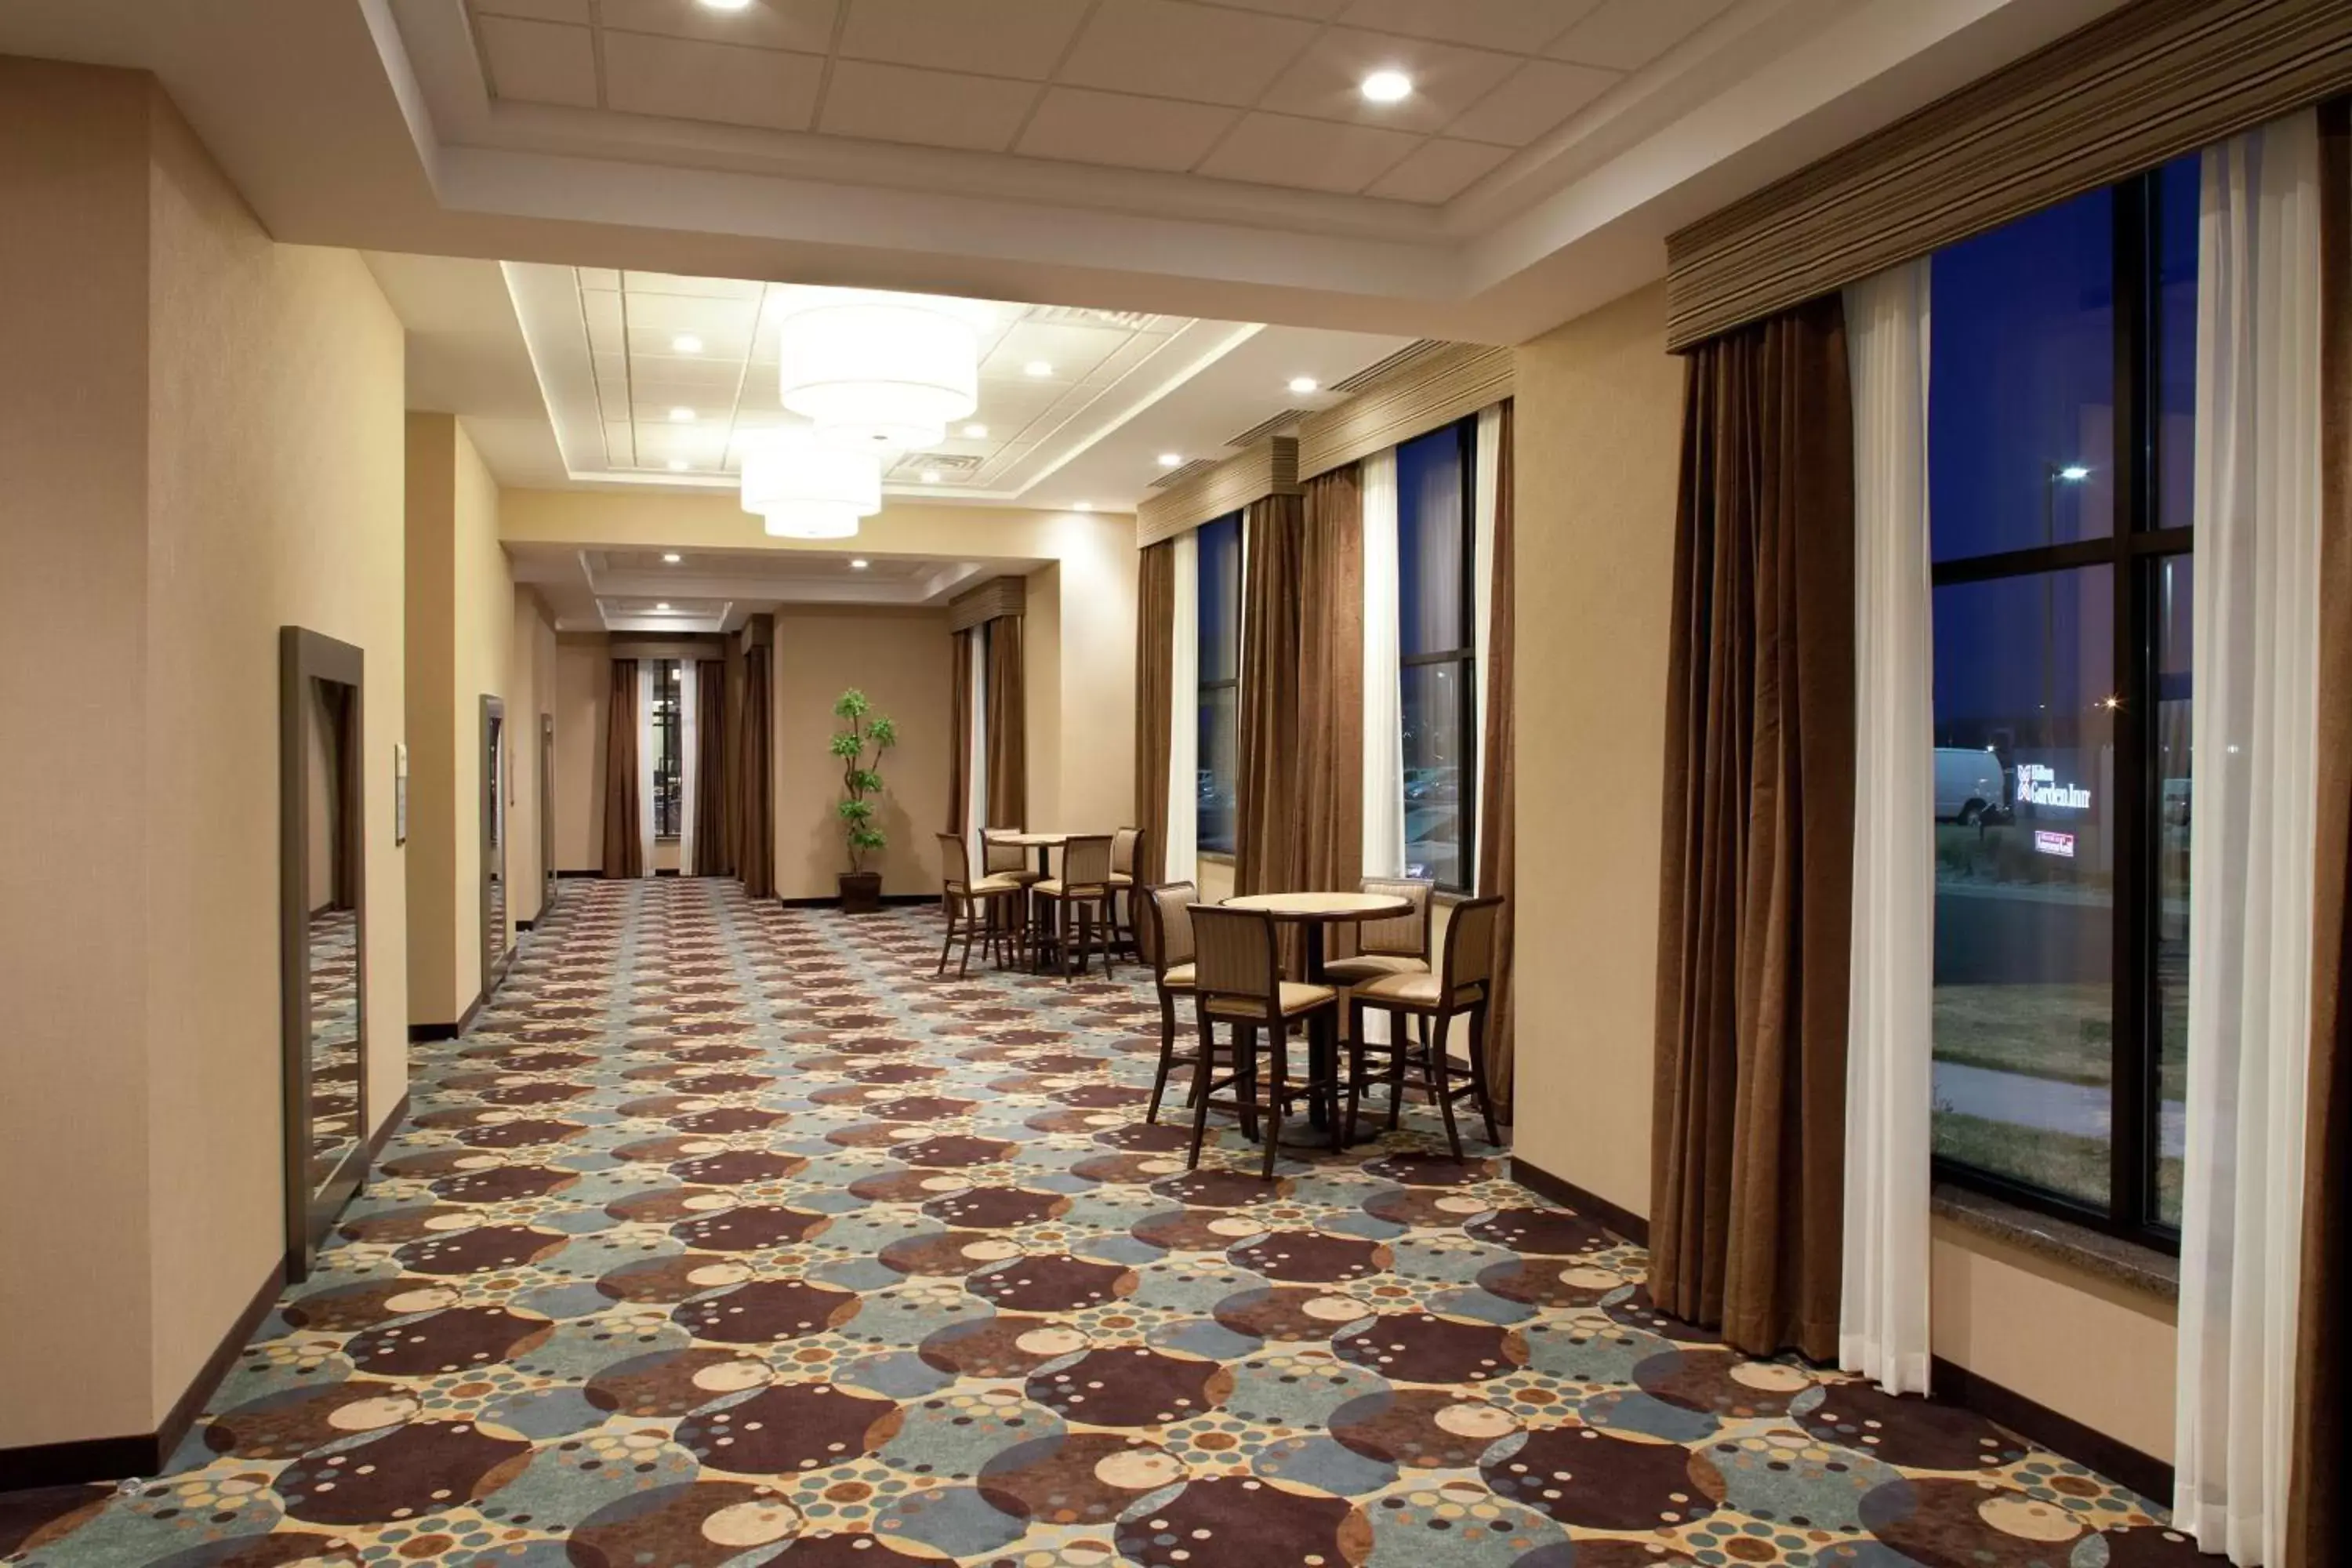 Meeting/conference room in Hilton Garden Inn Sioux Falls South